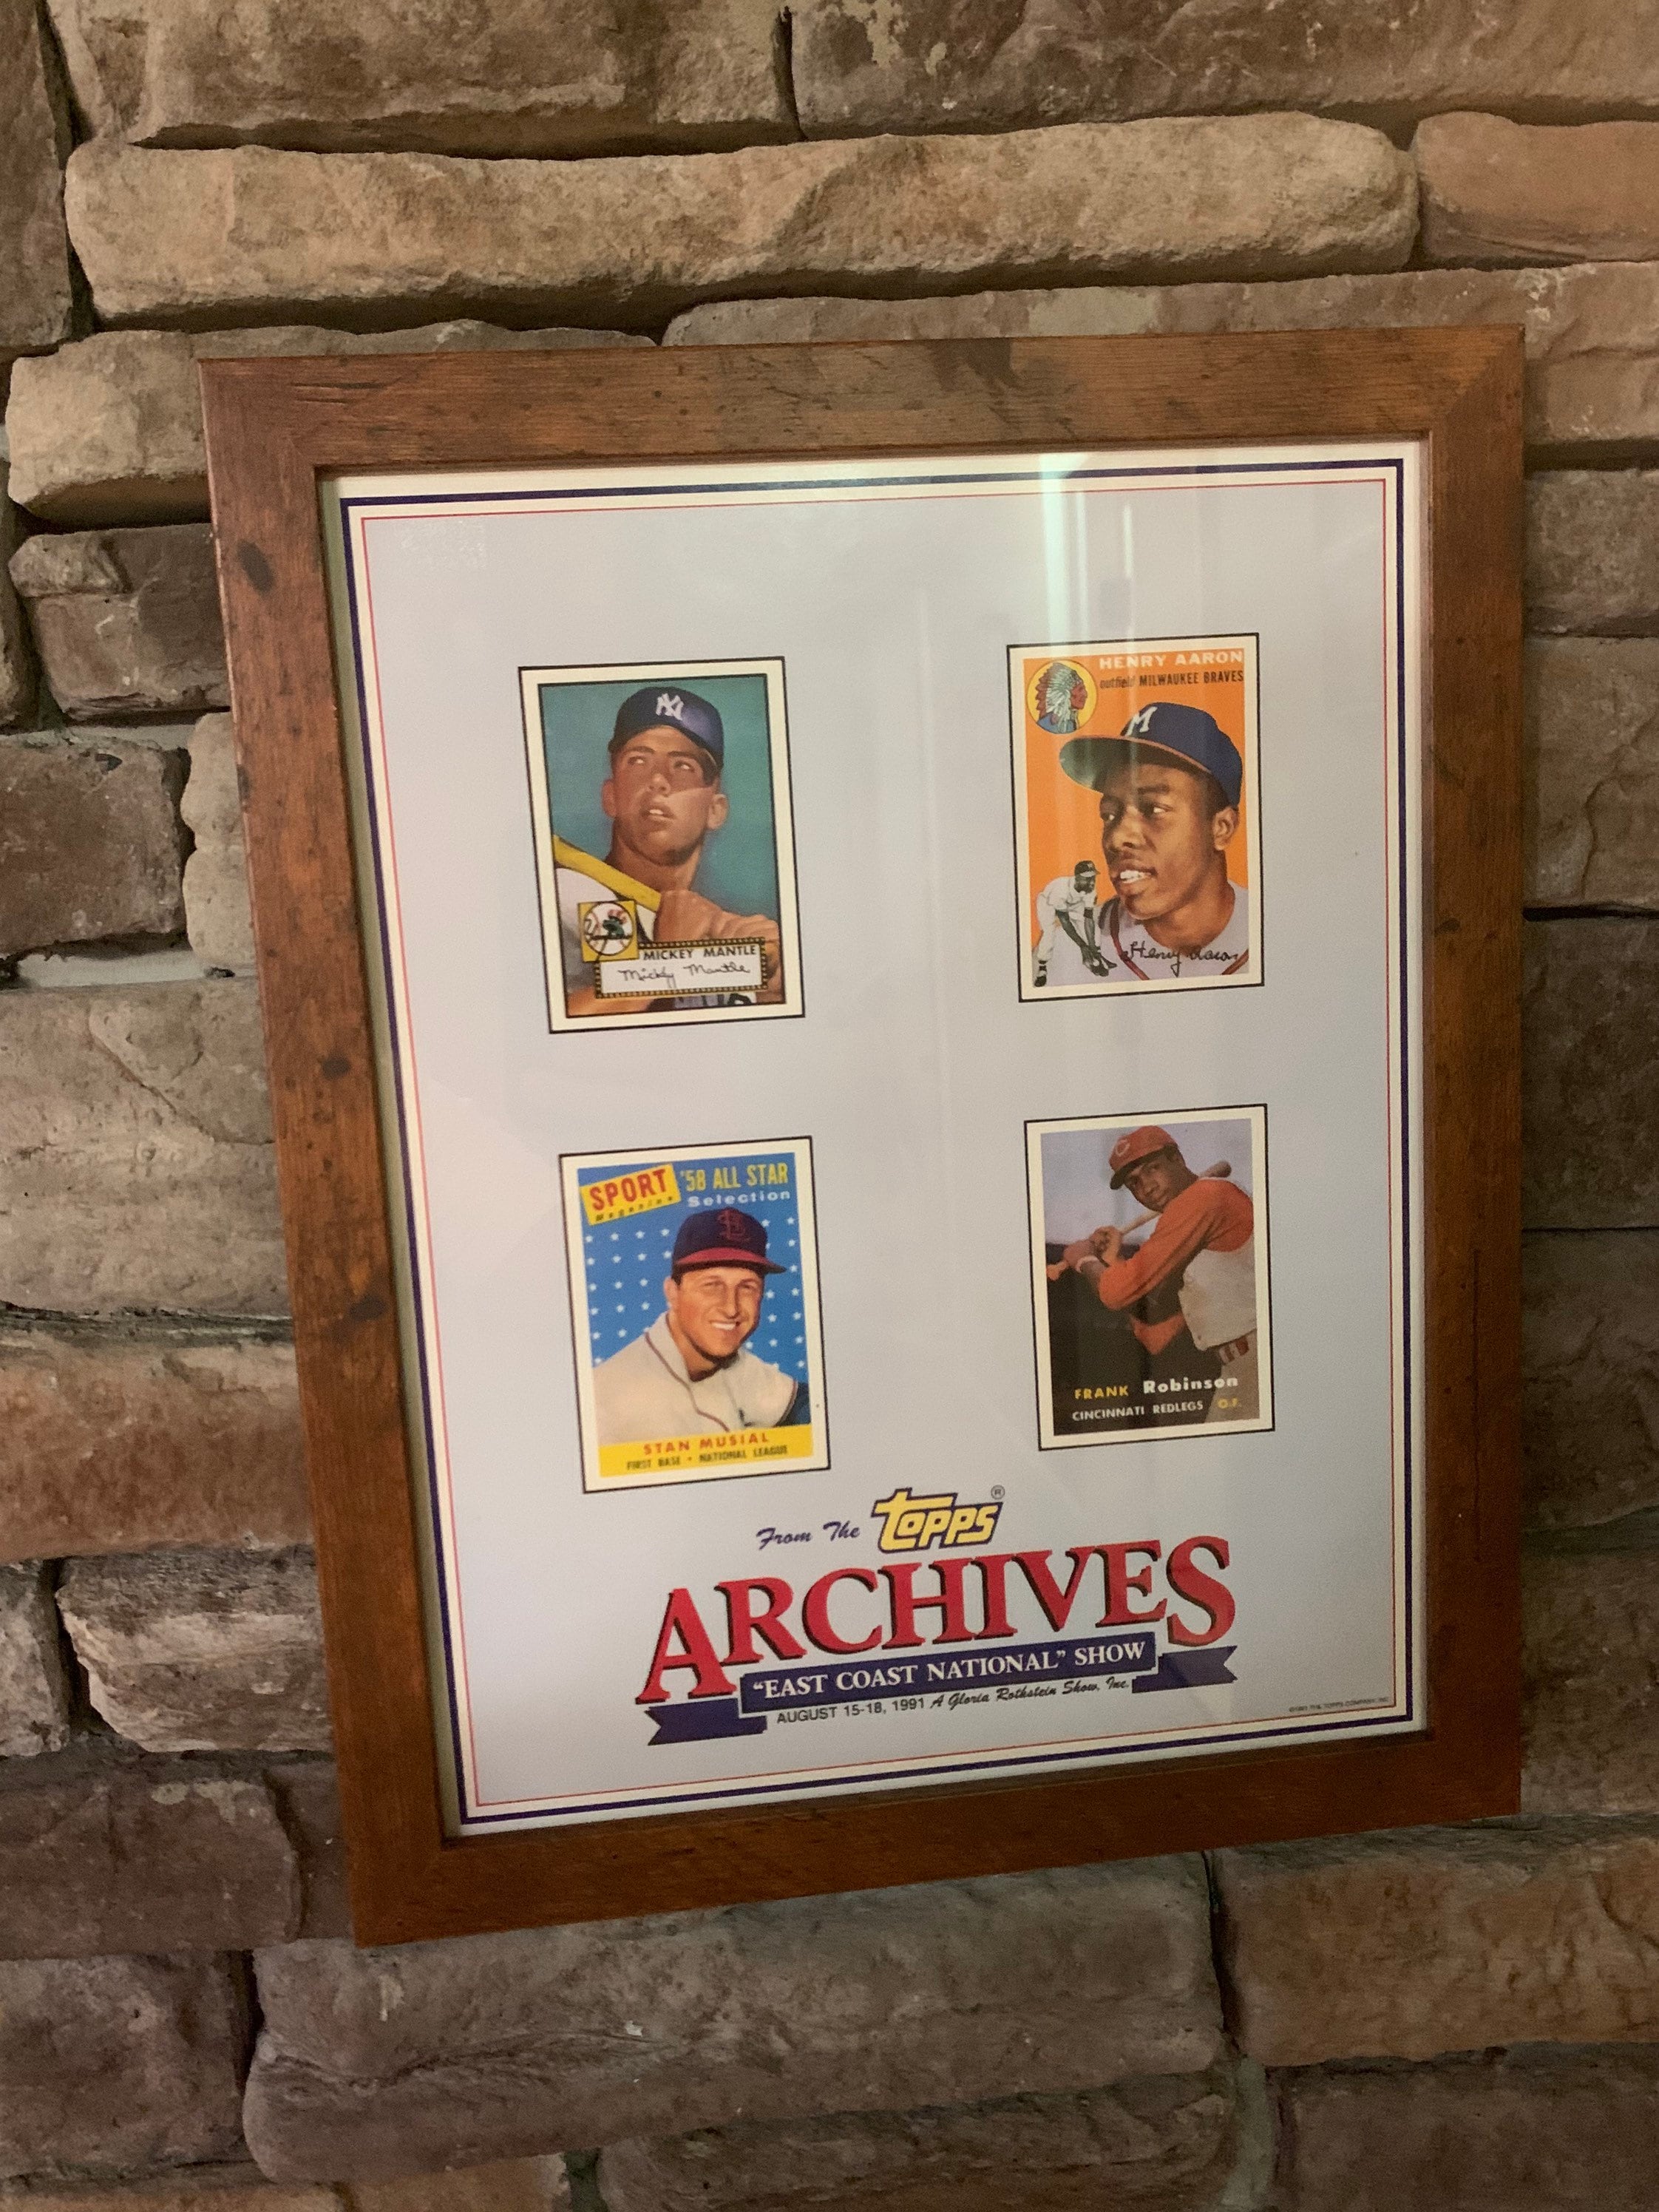 Topps Baseball cards east coast national show 1991 framed poster 12x15inch.